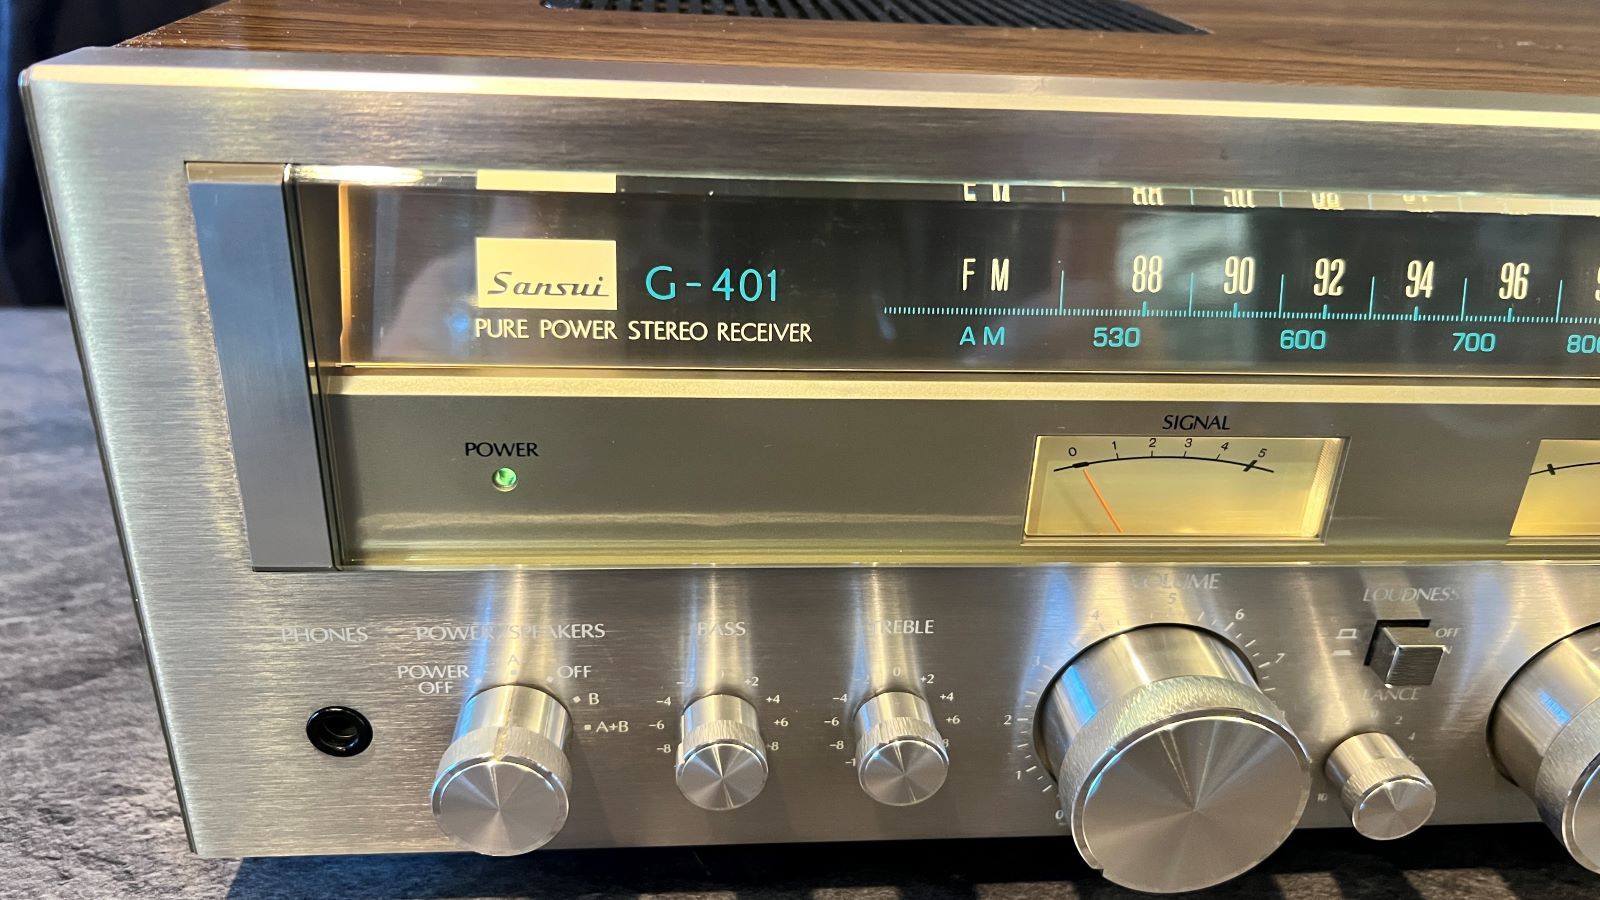 Sansui G-401(G-4500) Stereo Receiver